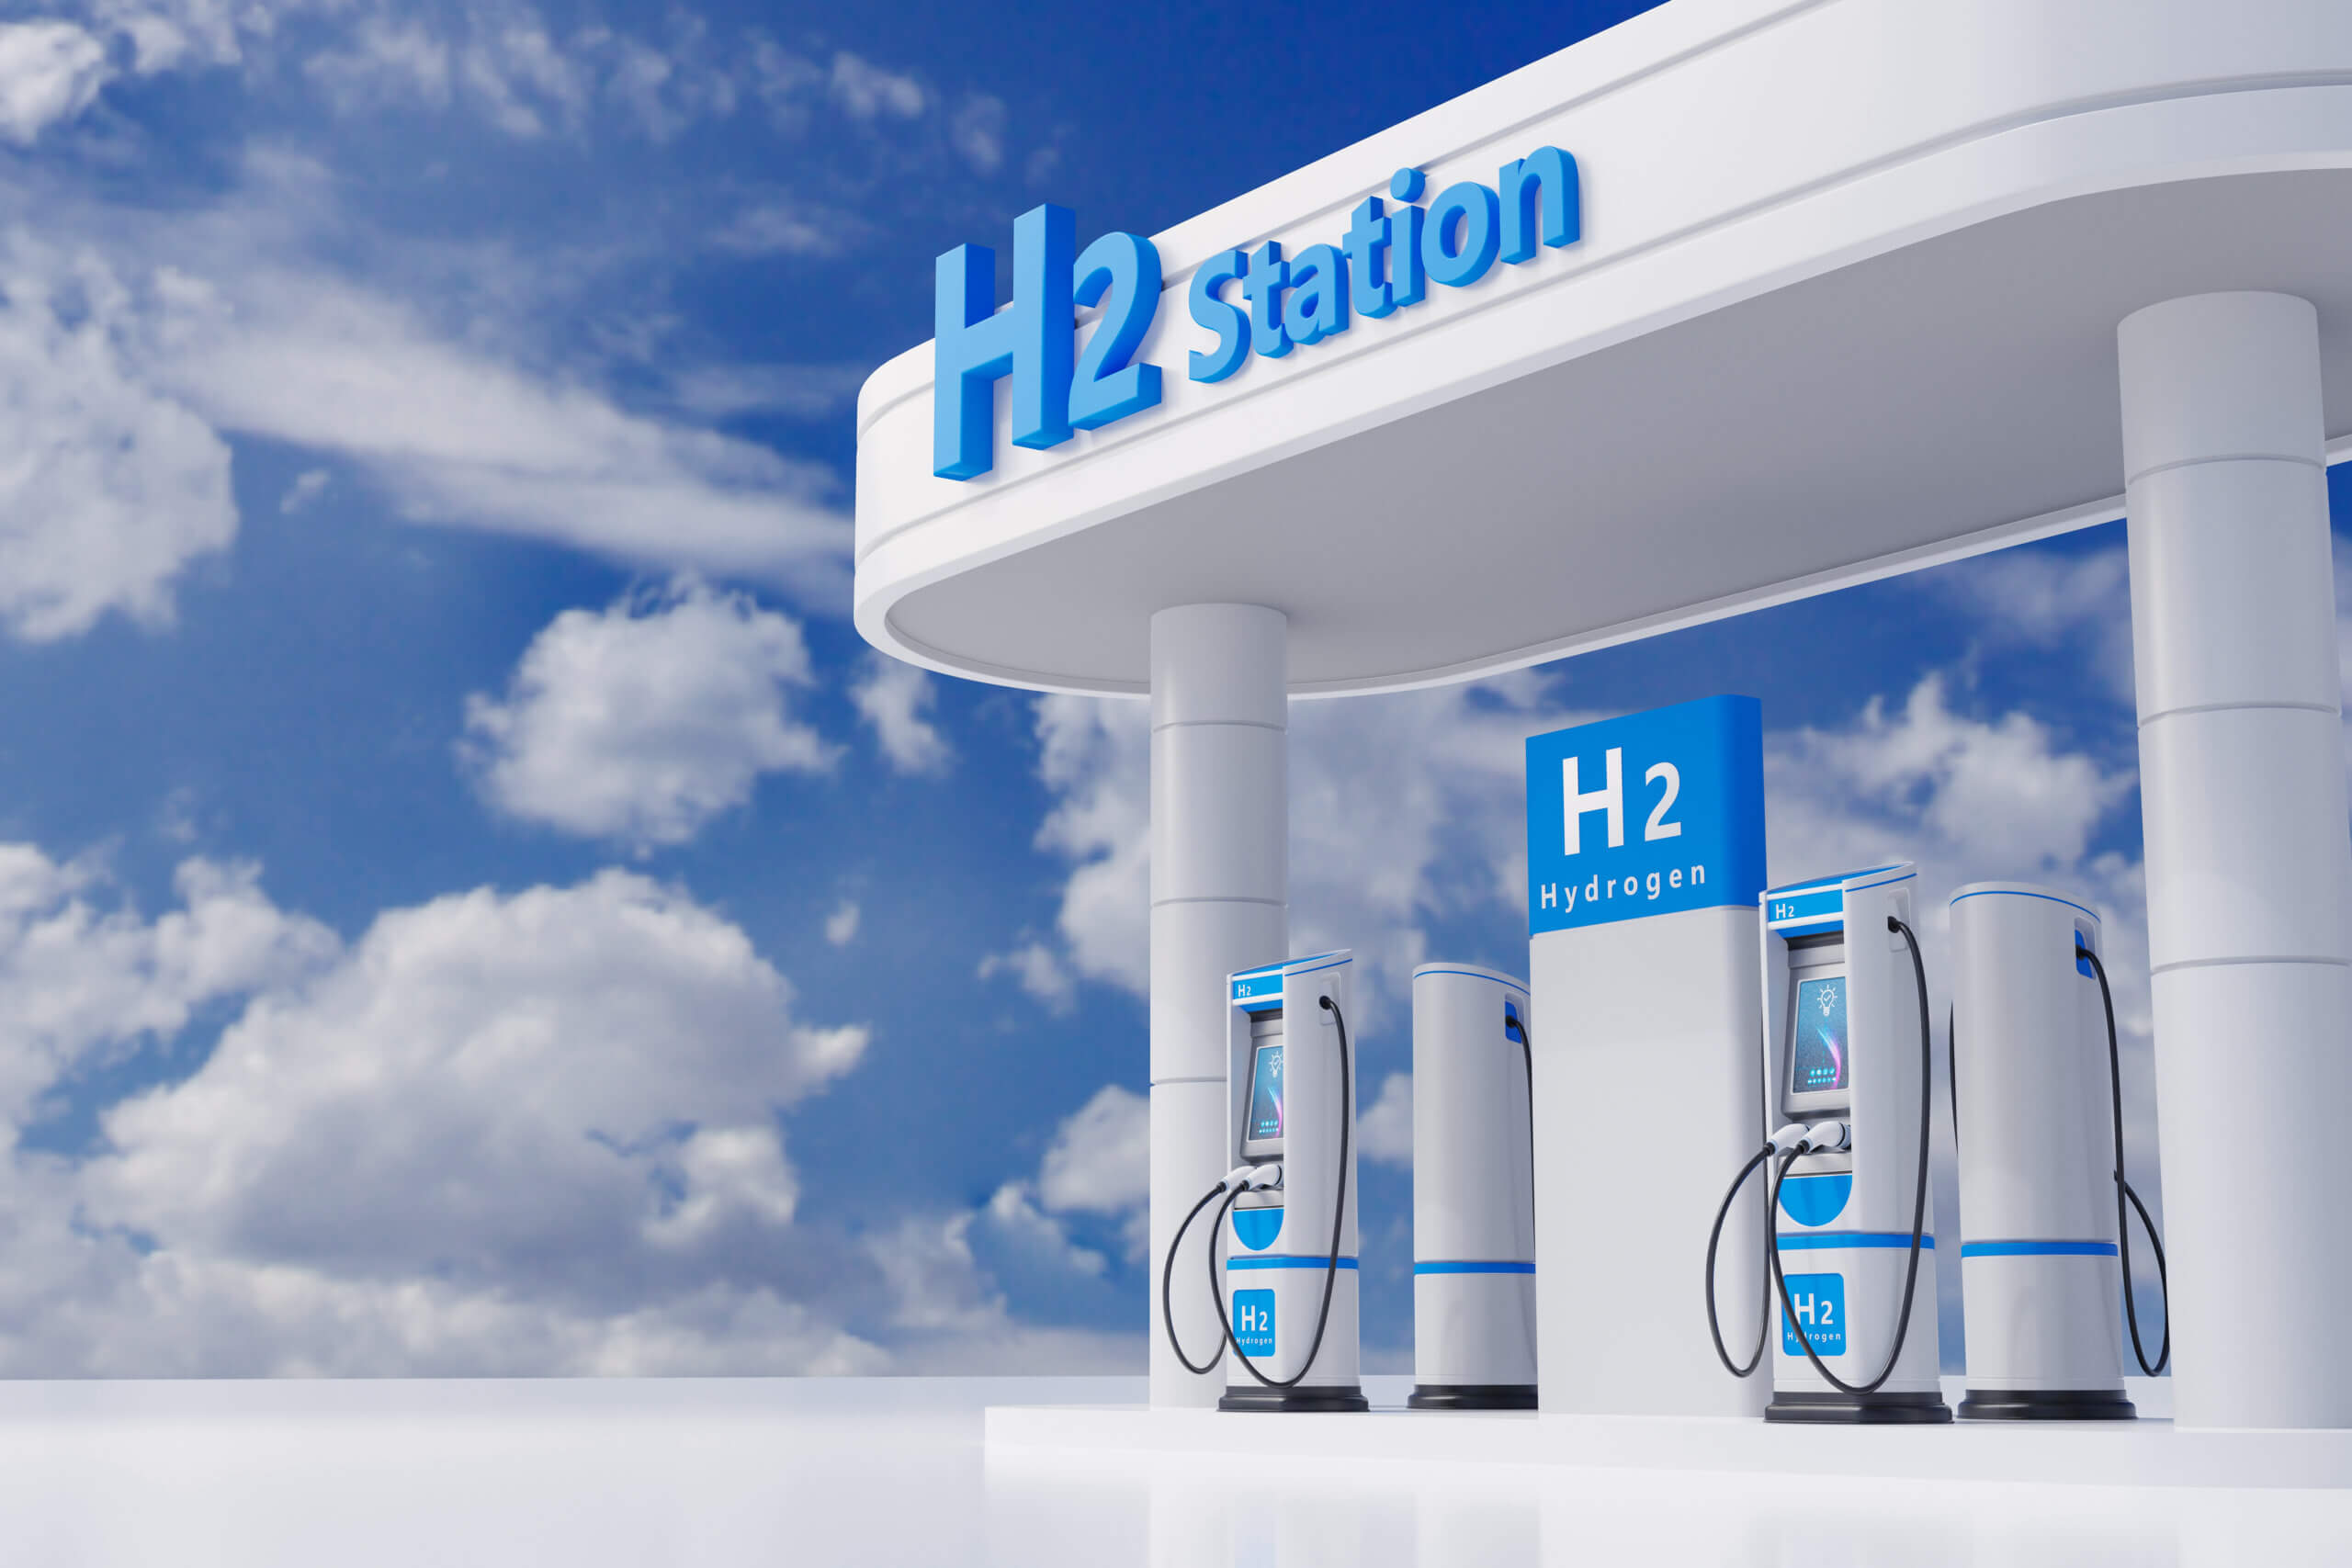 Finnish start-up commits to 50 hydrogen station developments by 2030